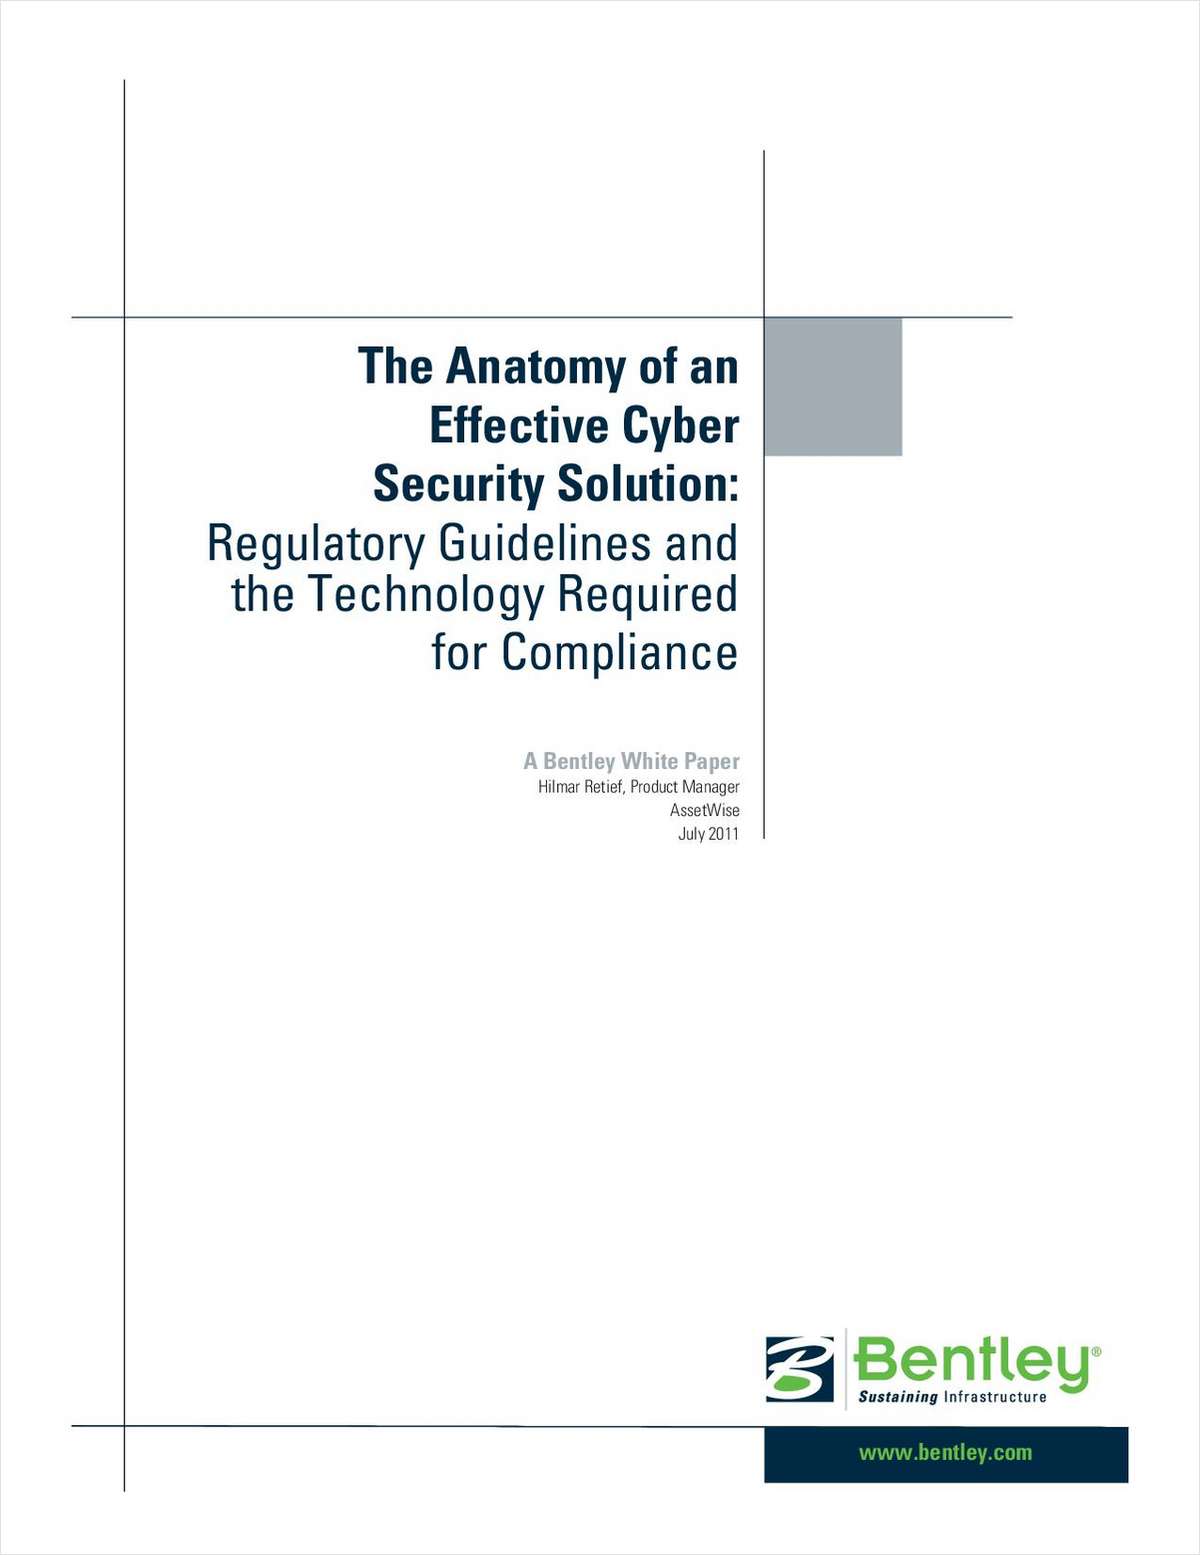 The Anatomy of an Effective Nuclear Cyber Security Solution